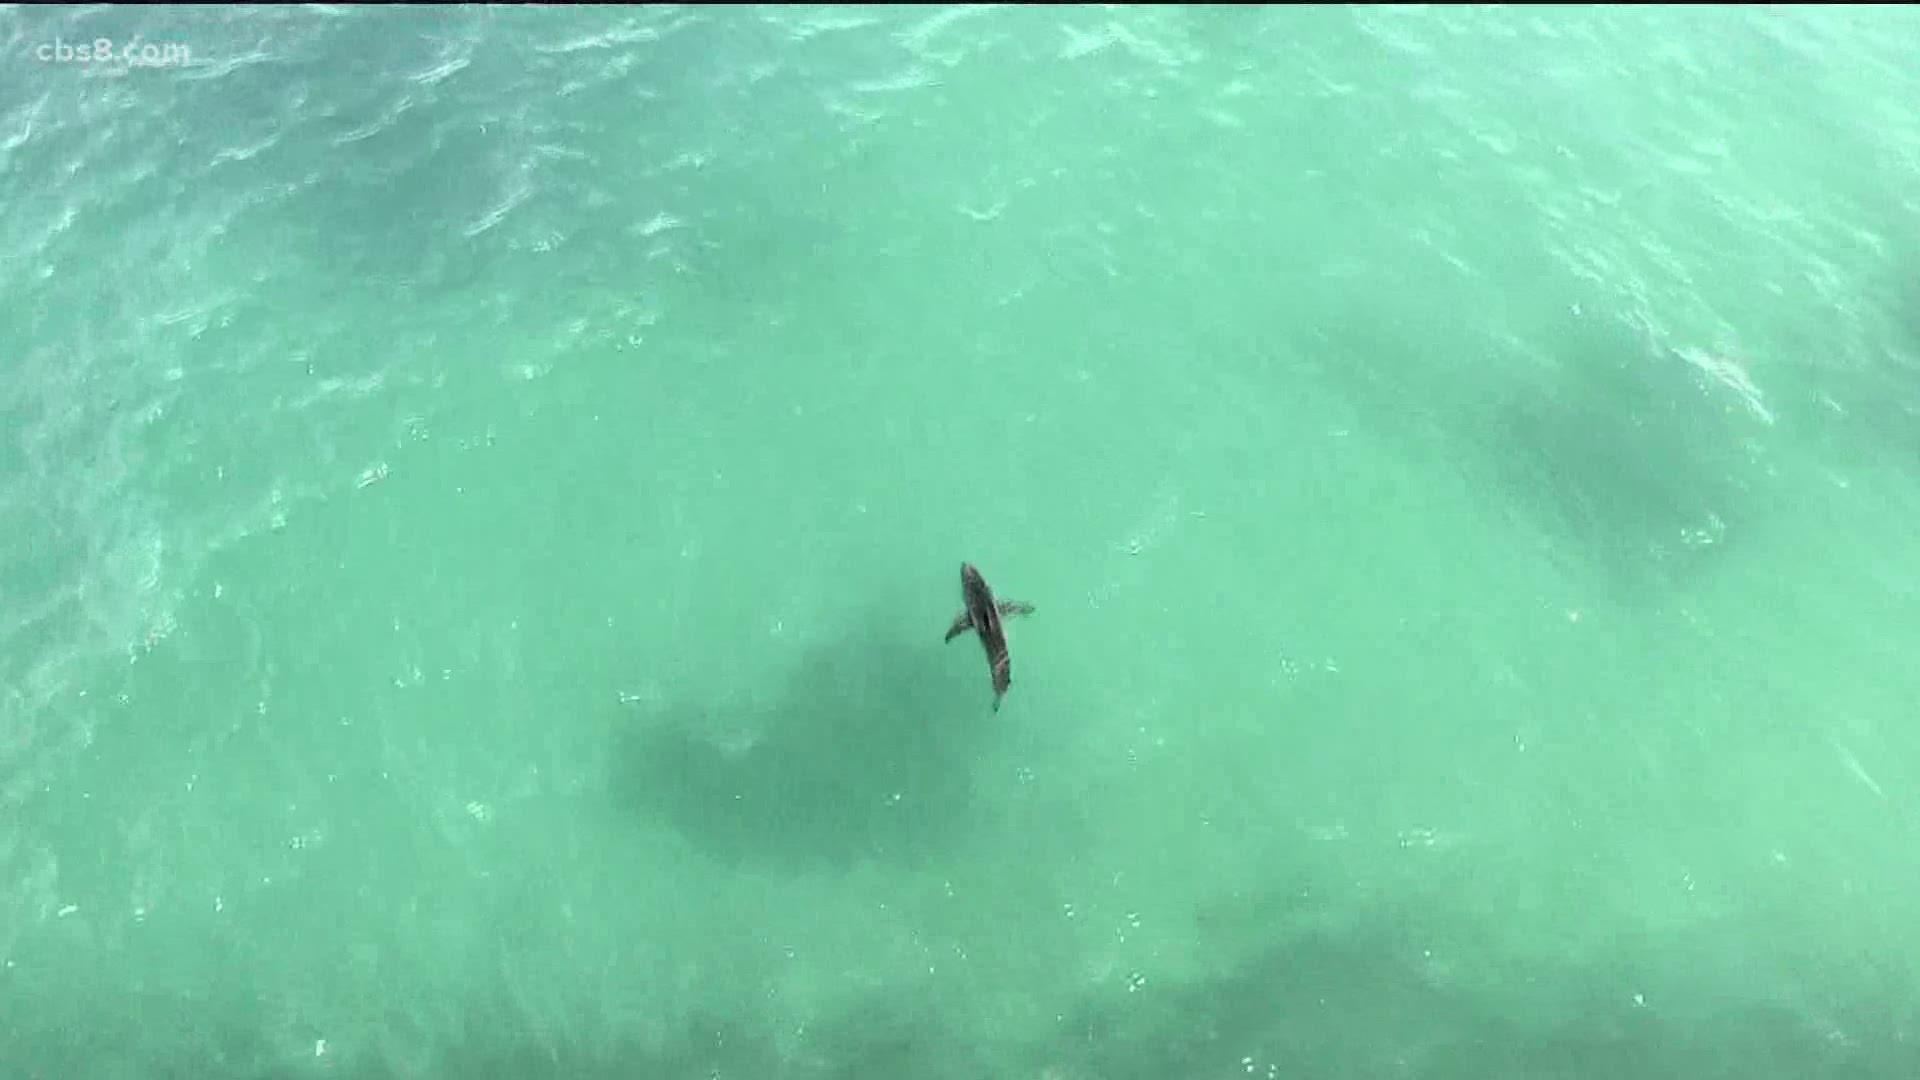 Marine biologists are using drones to scientifically study sharks in Southern California.